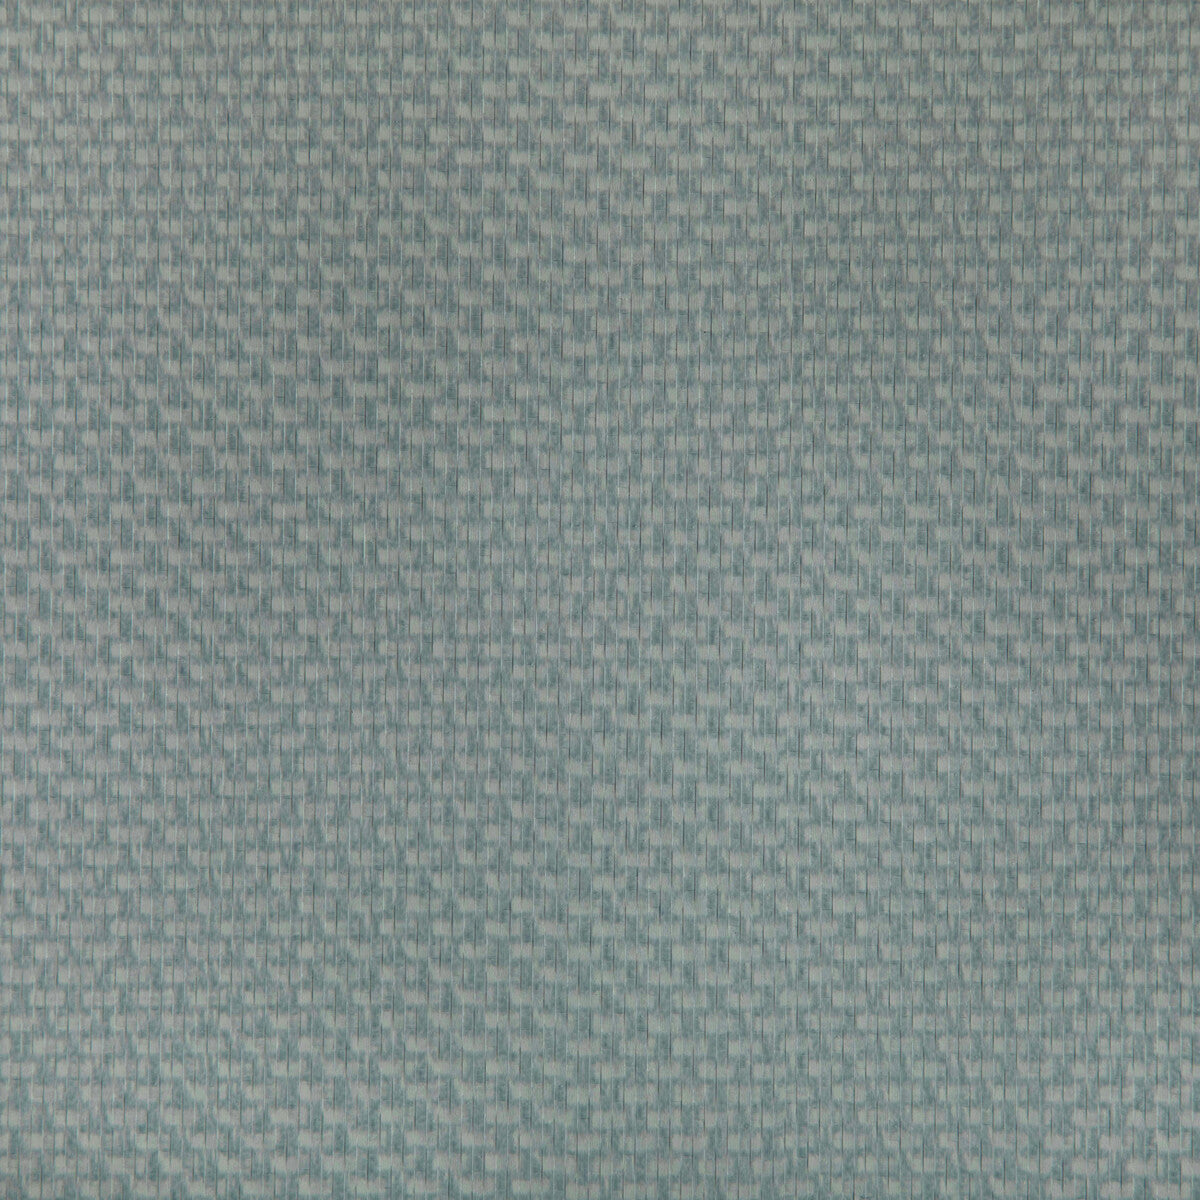 Stein fabric in mirage color - pattern STEIN.135.0 - by Kravet Contract